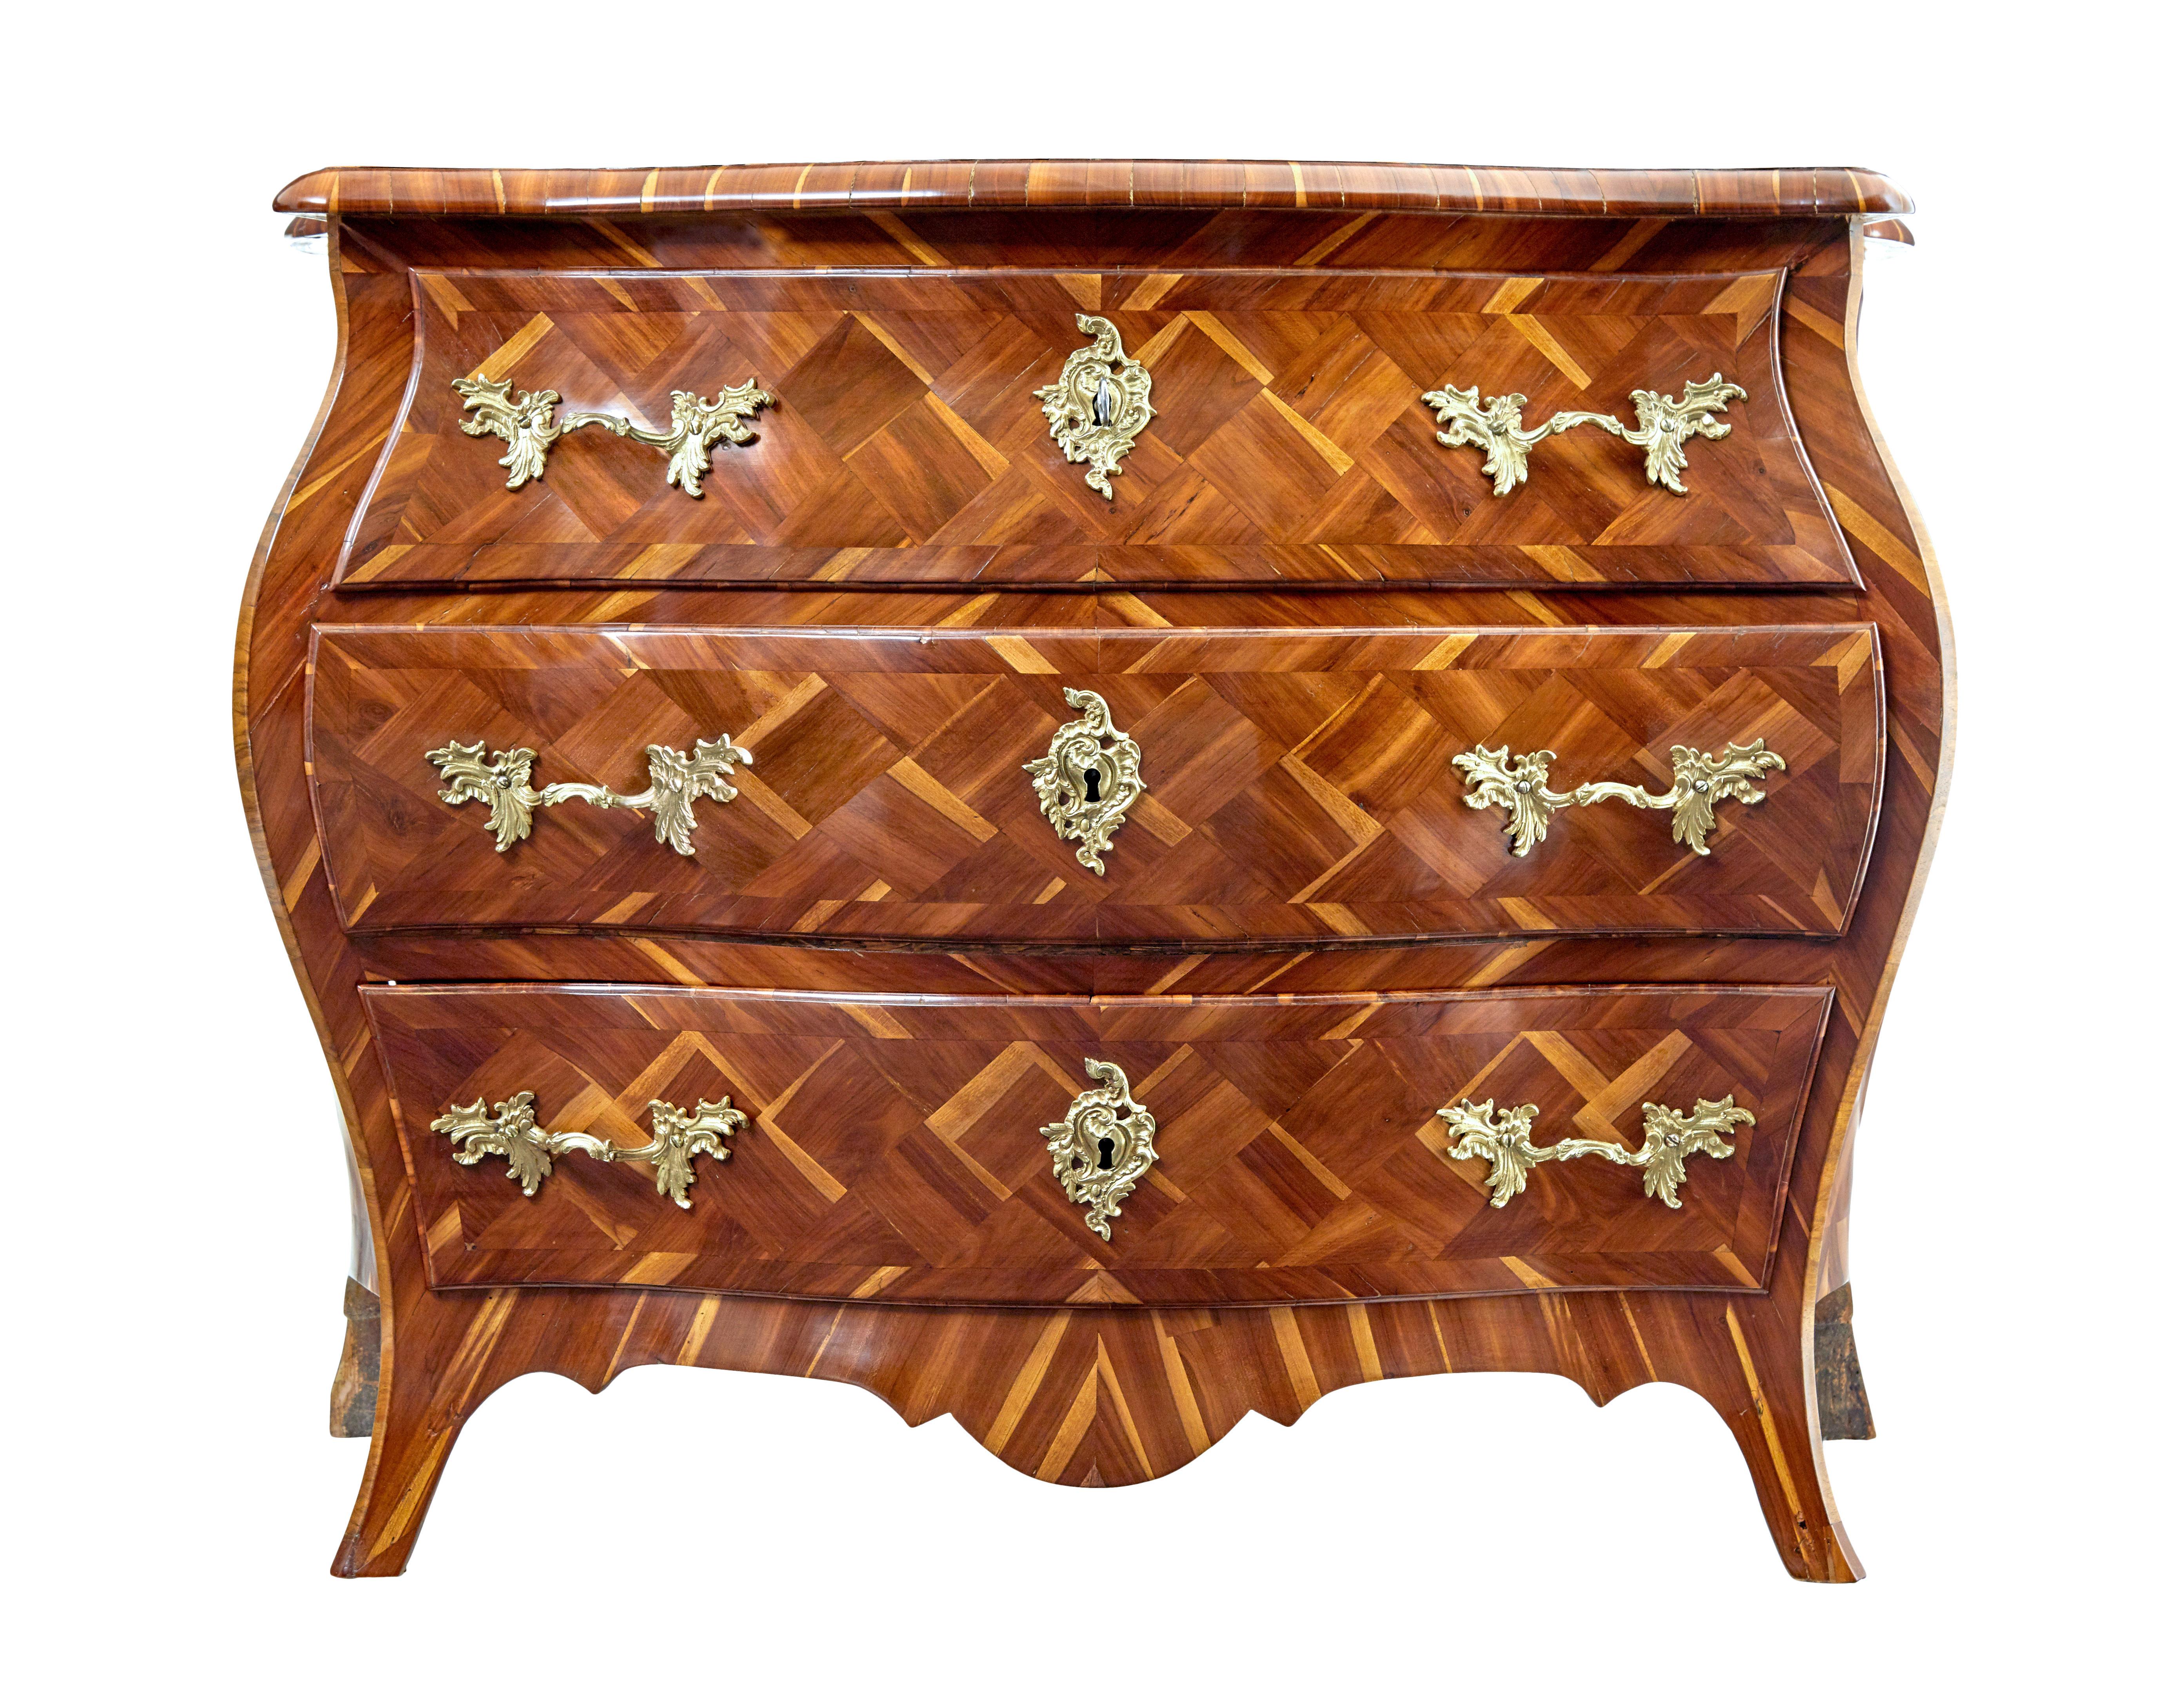 Early 18th century rococo parquetry plum bombe commode circa 1730.

We are pleased to offer one of the finest commodes we have dealt in.  Rococo period and unusually veneered in plum, which showcase's the unique natural of this wood

Parquet has